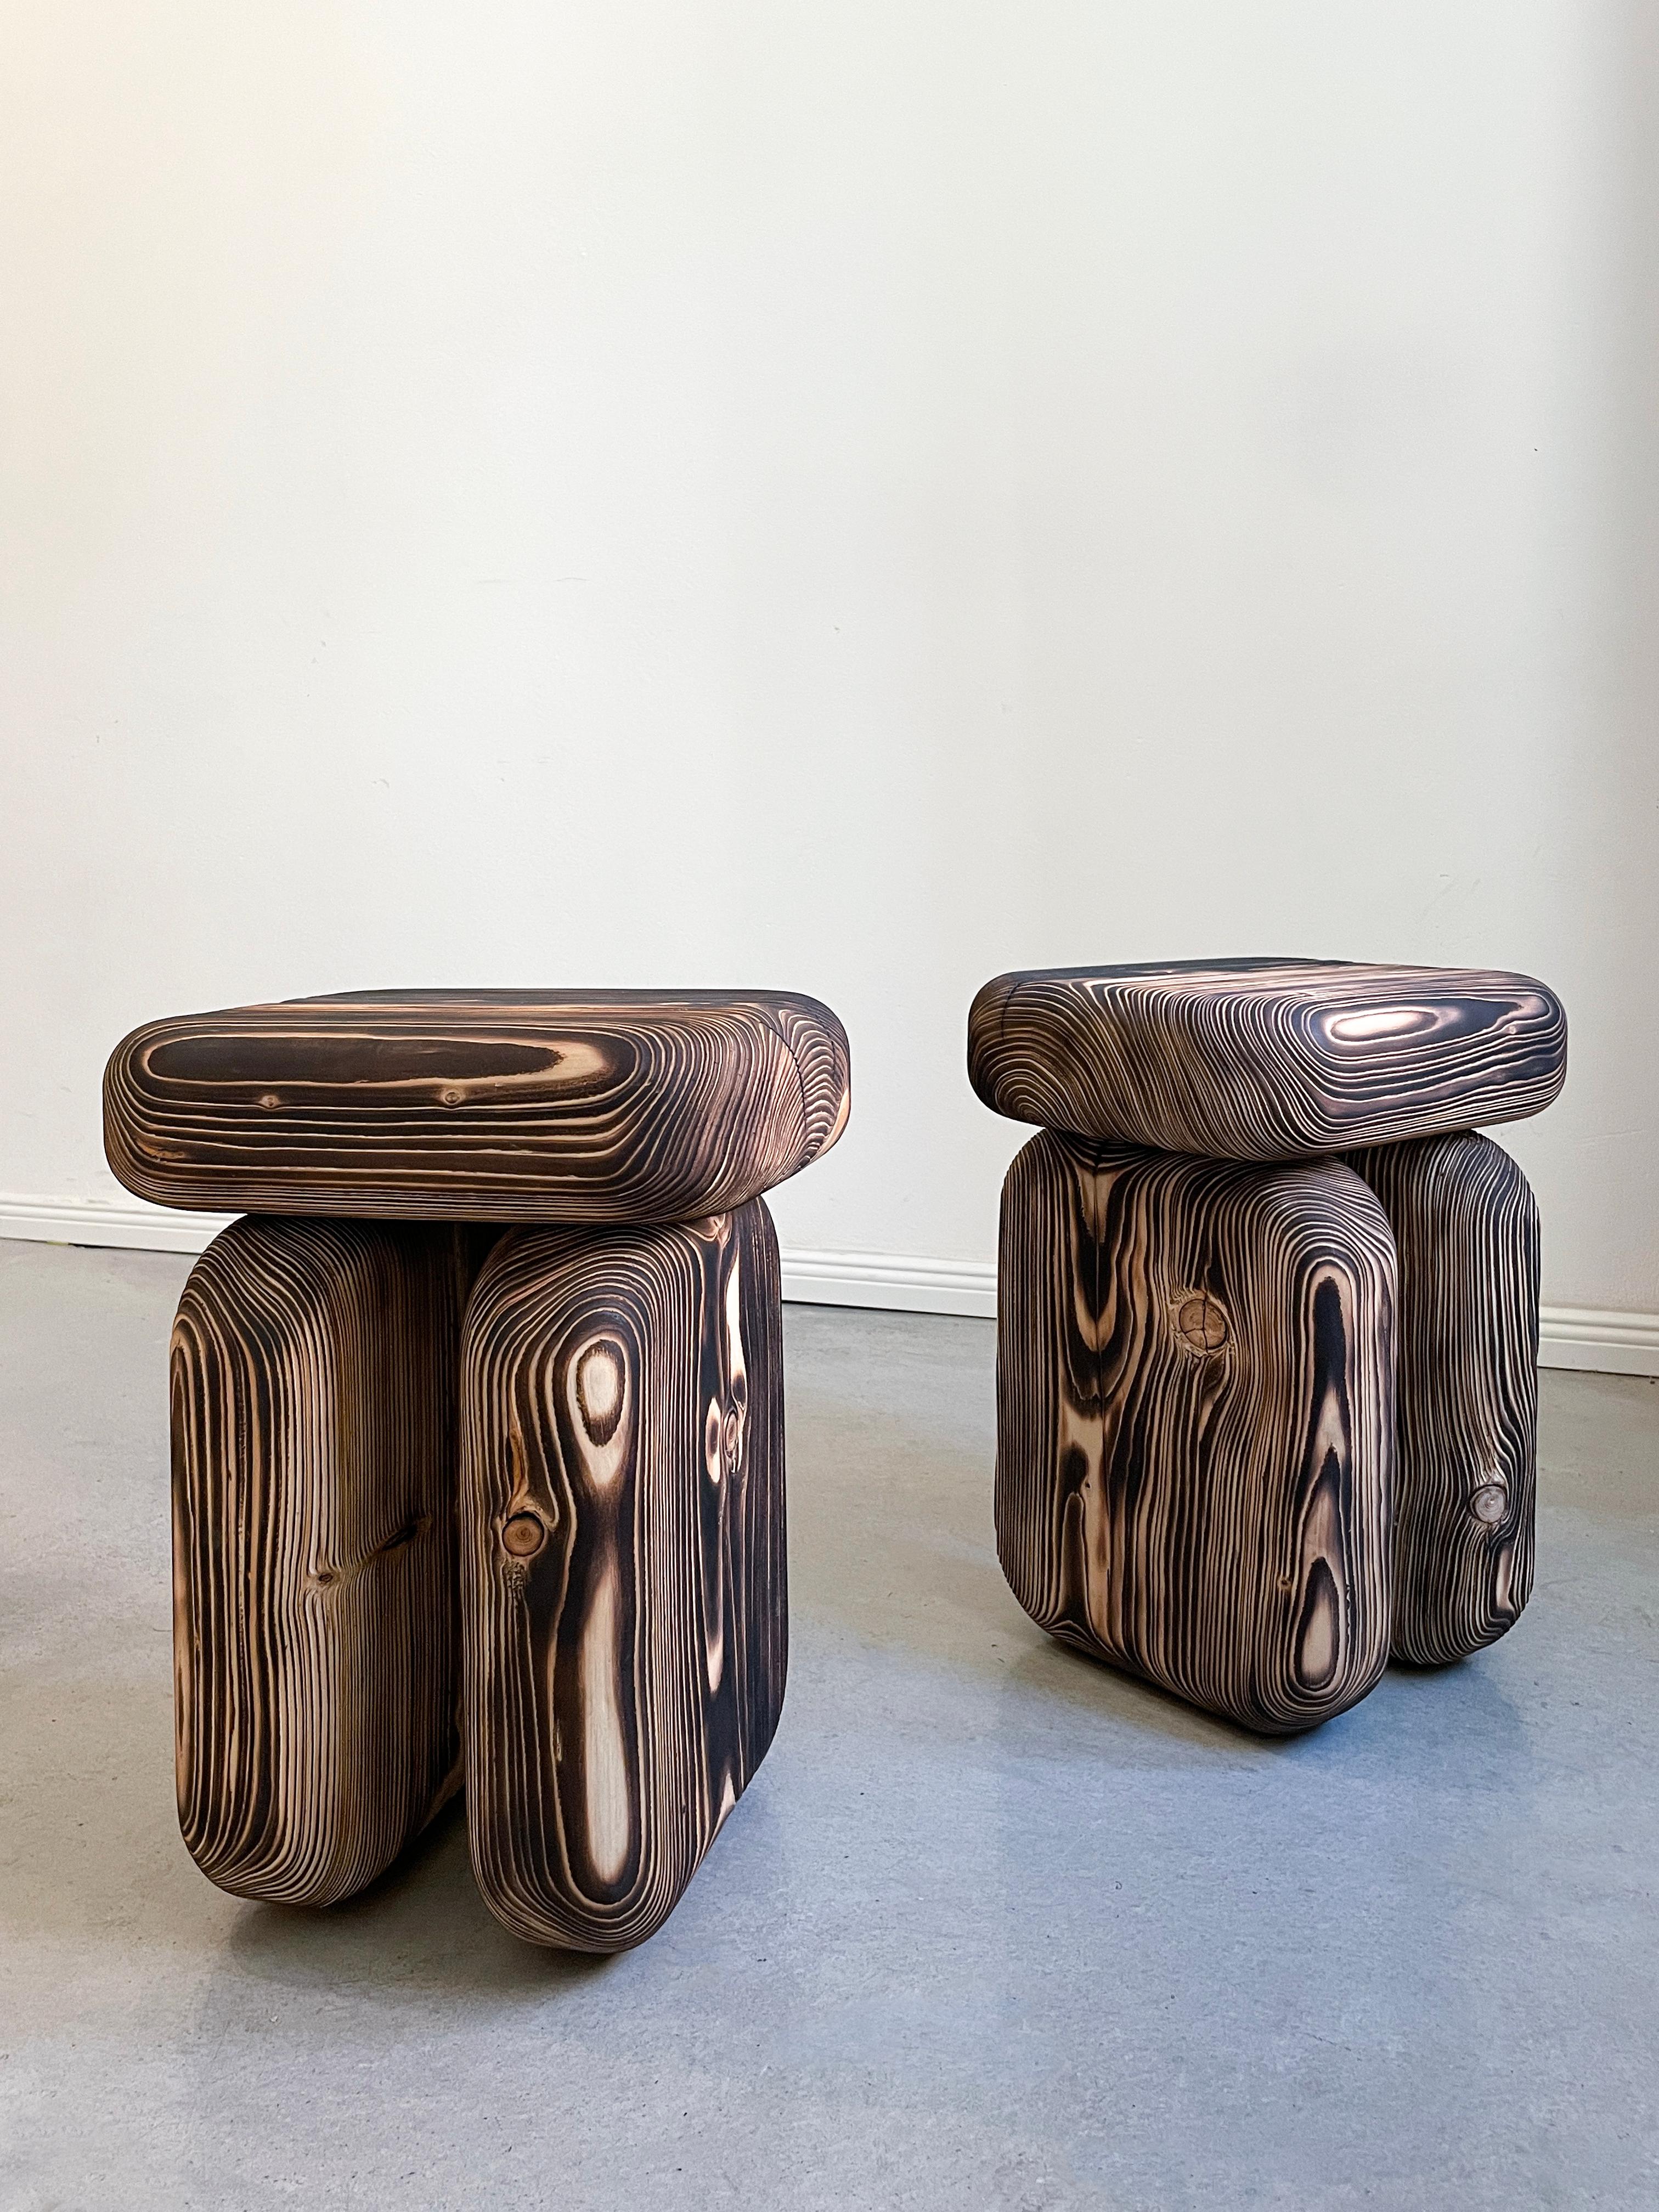 Dune is a family of seating furniture made of solid wood. The Collection is a result of observing how time forms Material. The sandblasting technique imitates the forces of nature, removing the soft early wood to reveal the annual rings of the tree.